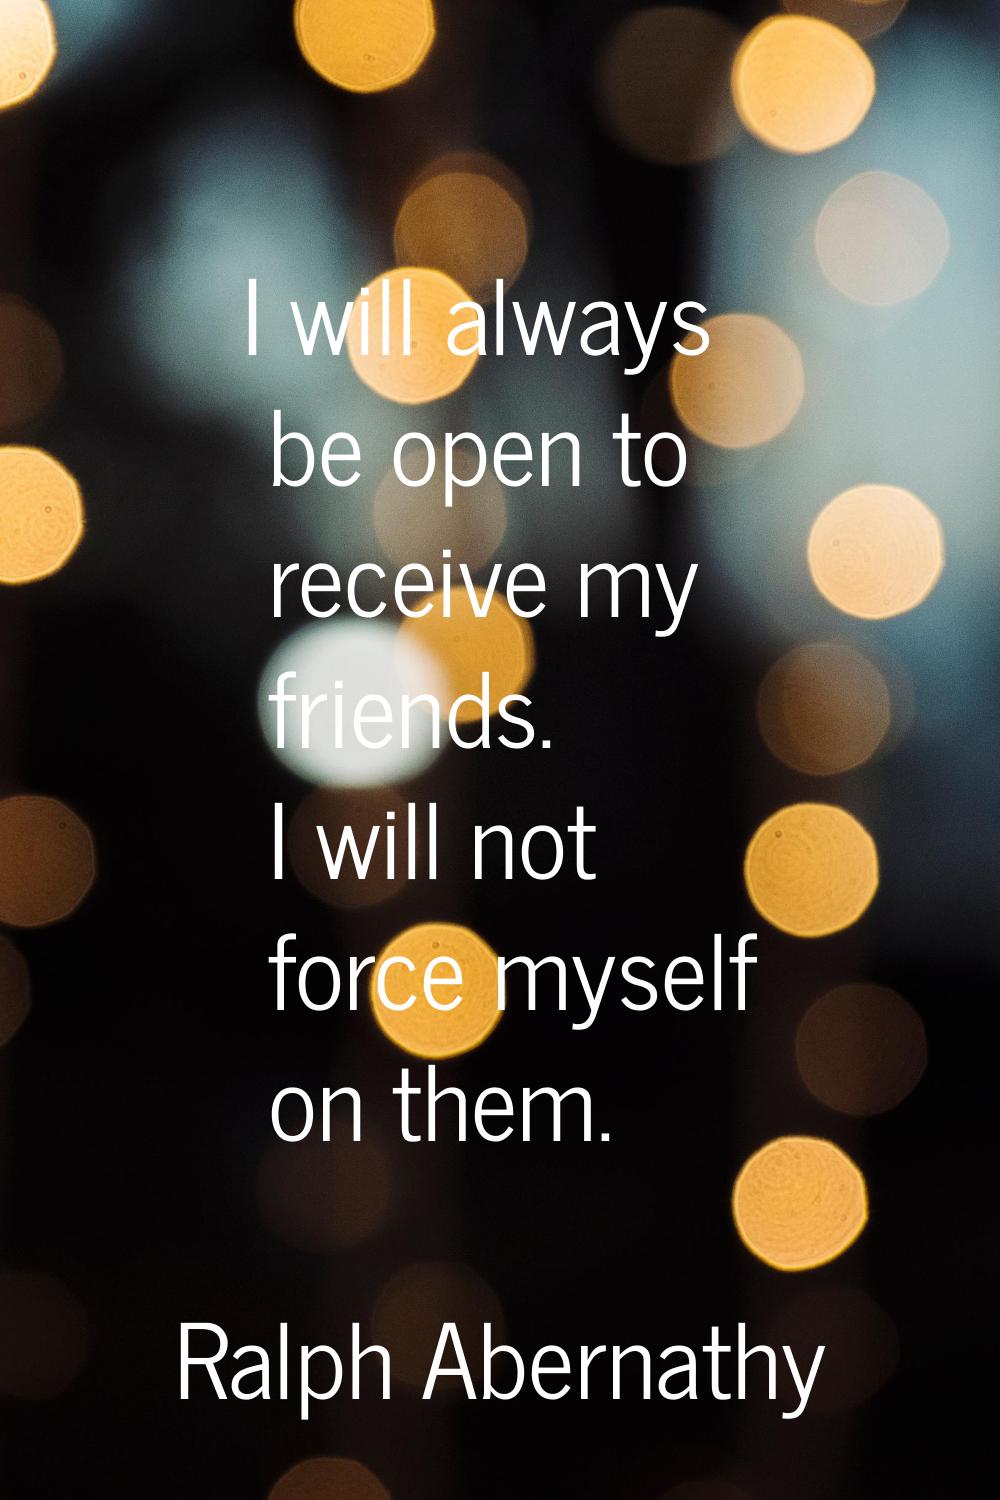 I will always be open to receive my friends. I will not force myself on them.